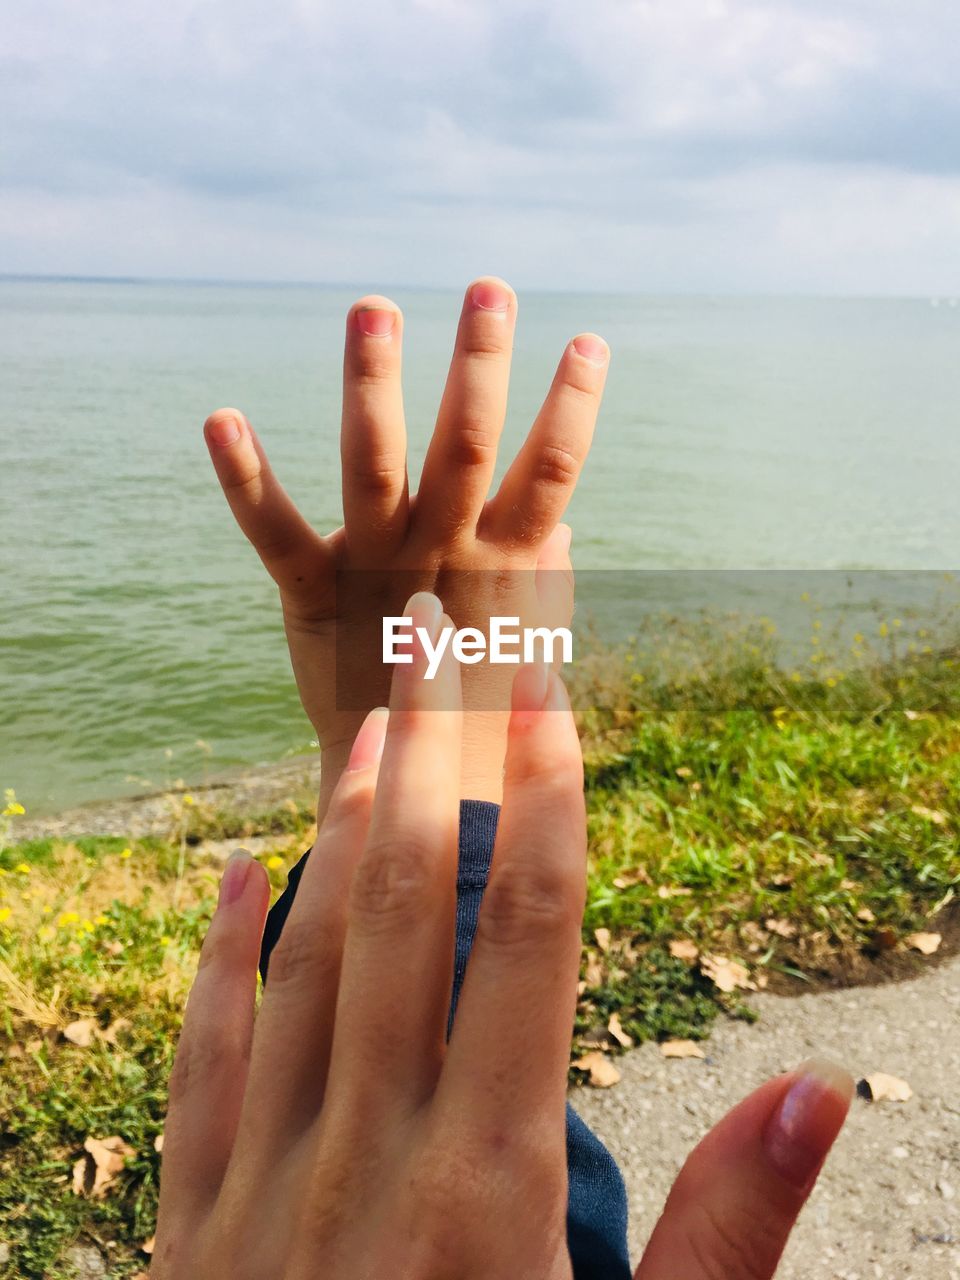 CROPPED IMAGE OF HAND AGAINST SEA